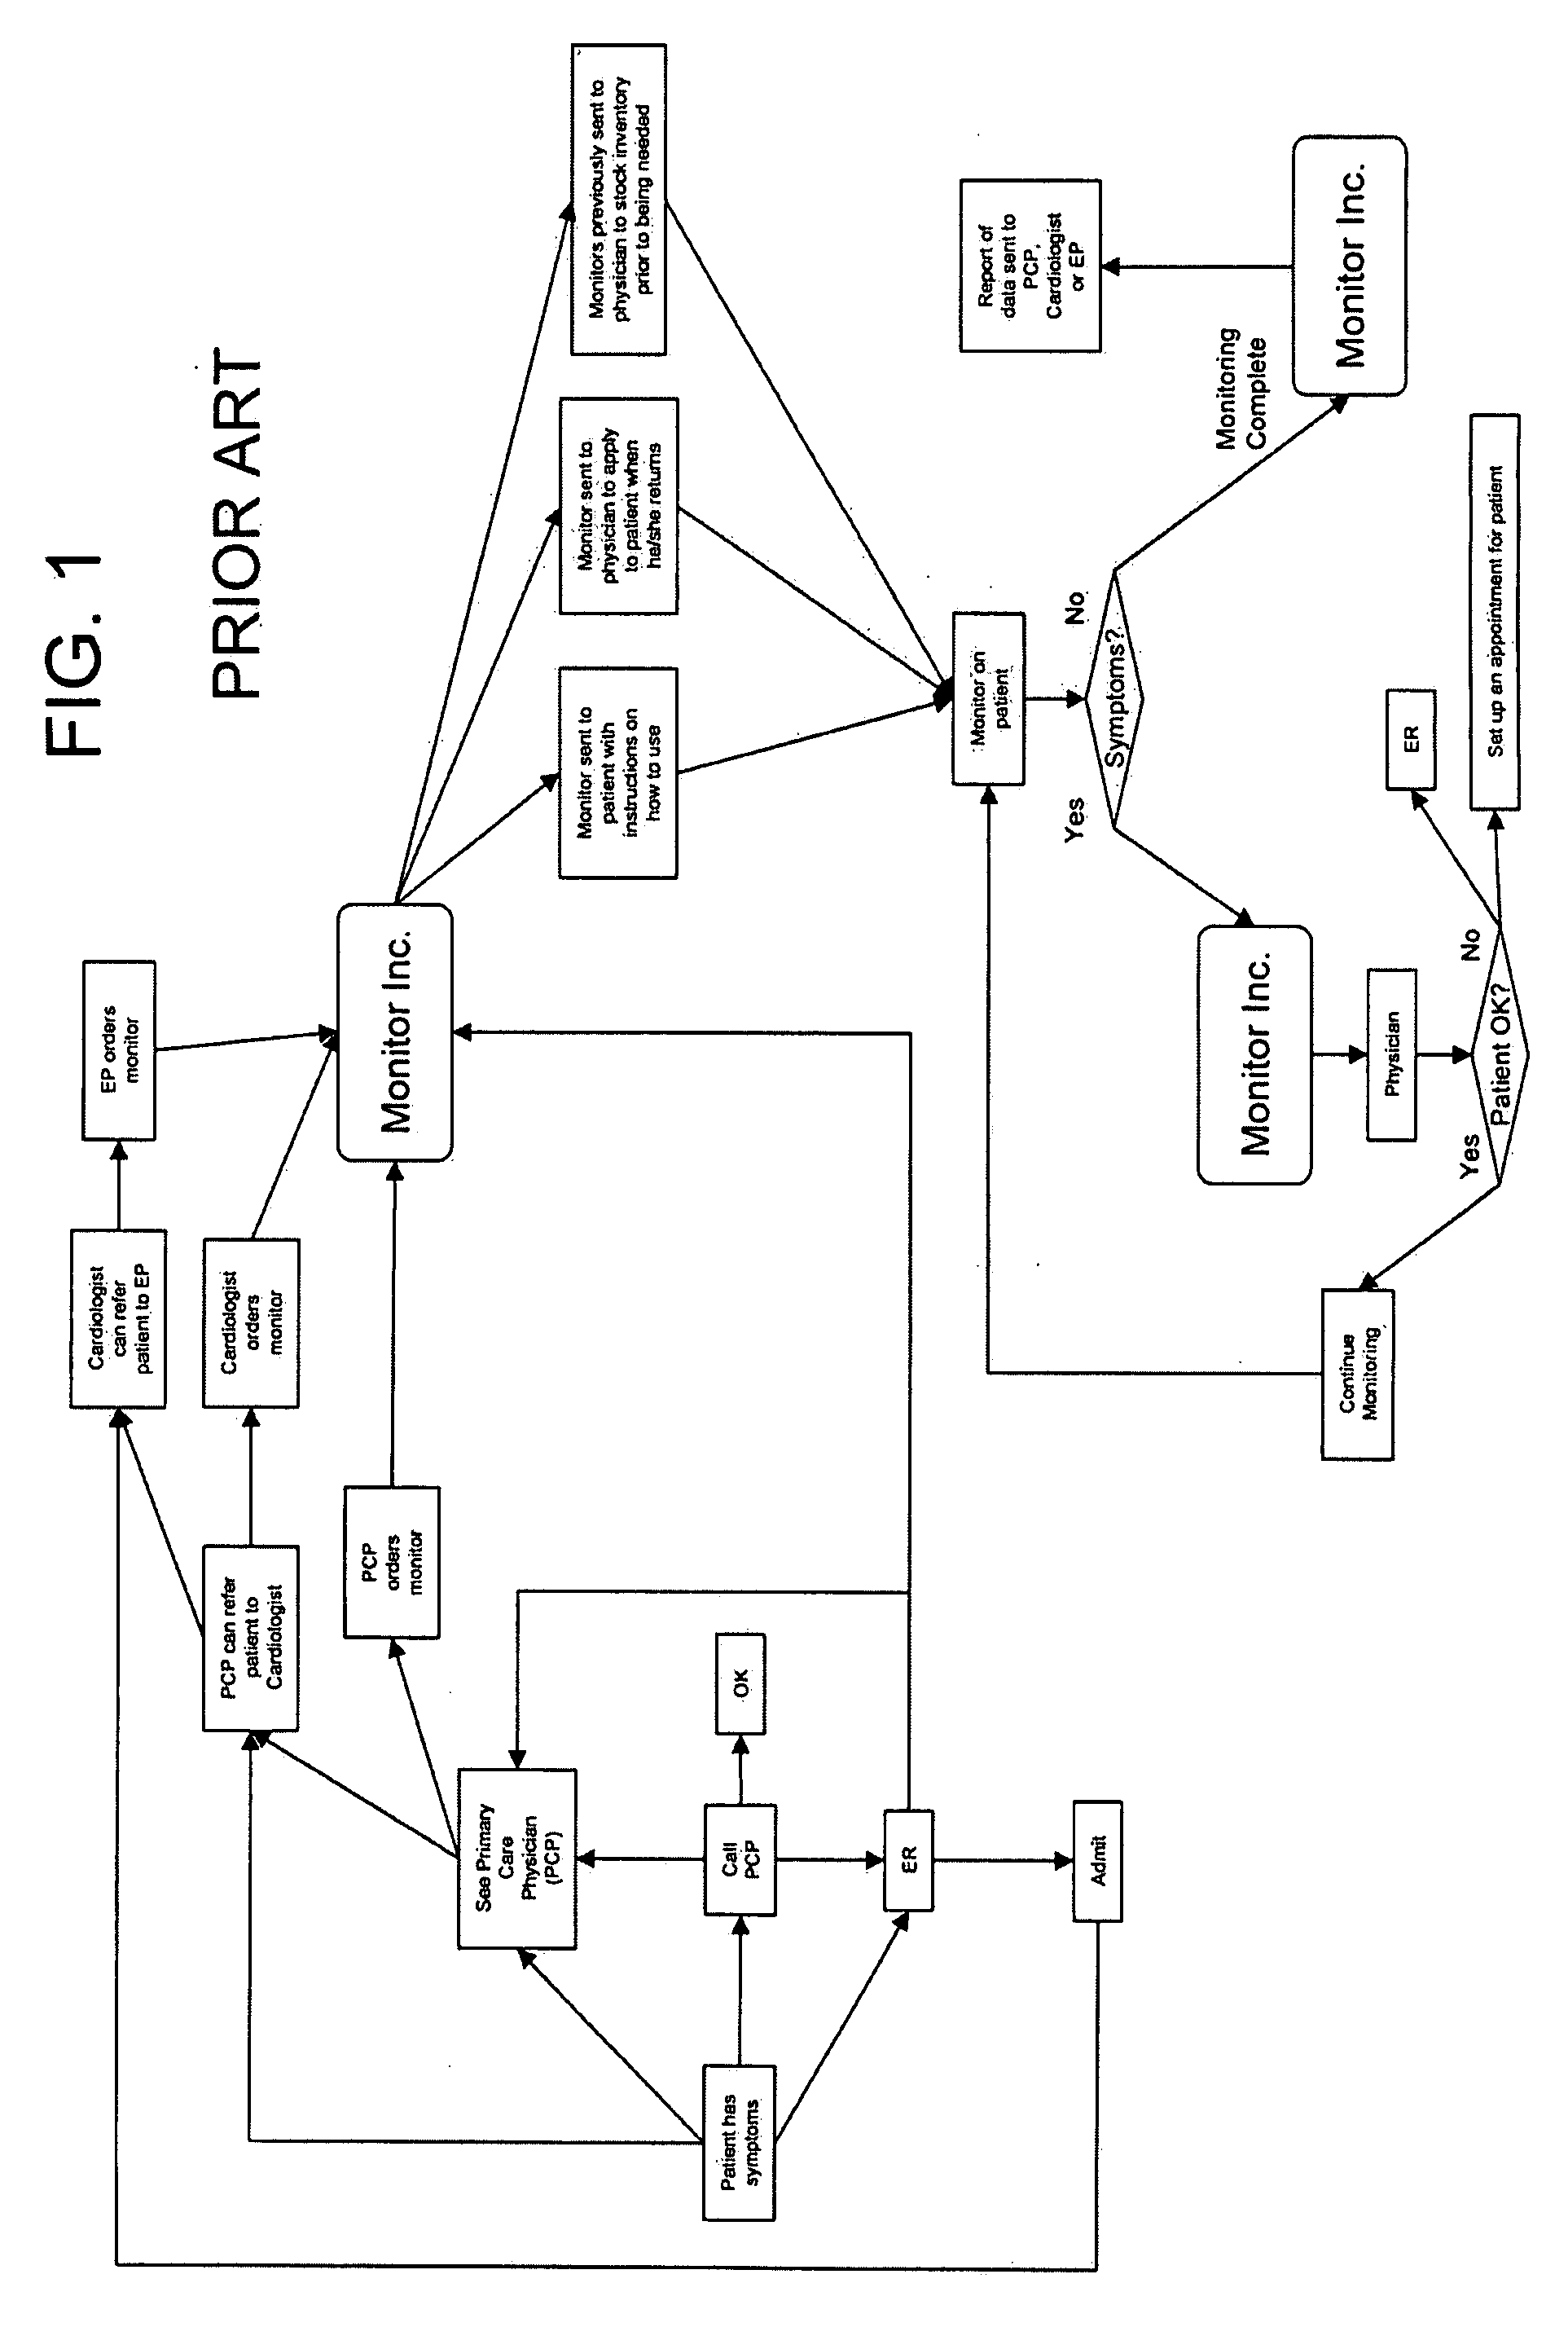 Non-invasive cardiac monitor and methods of using continuously recorded cardiac data